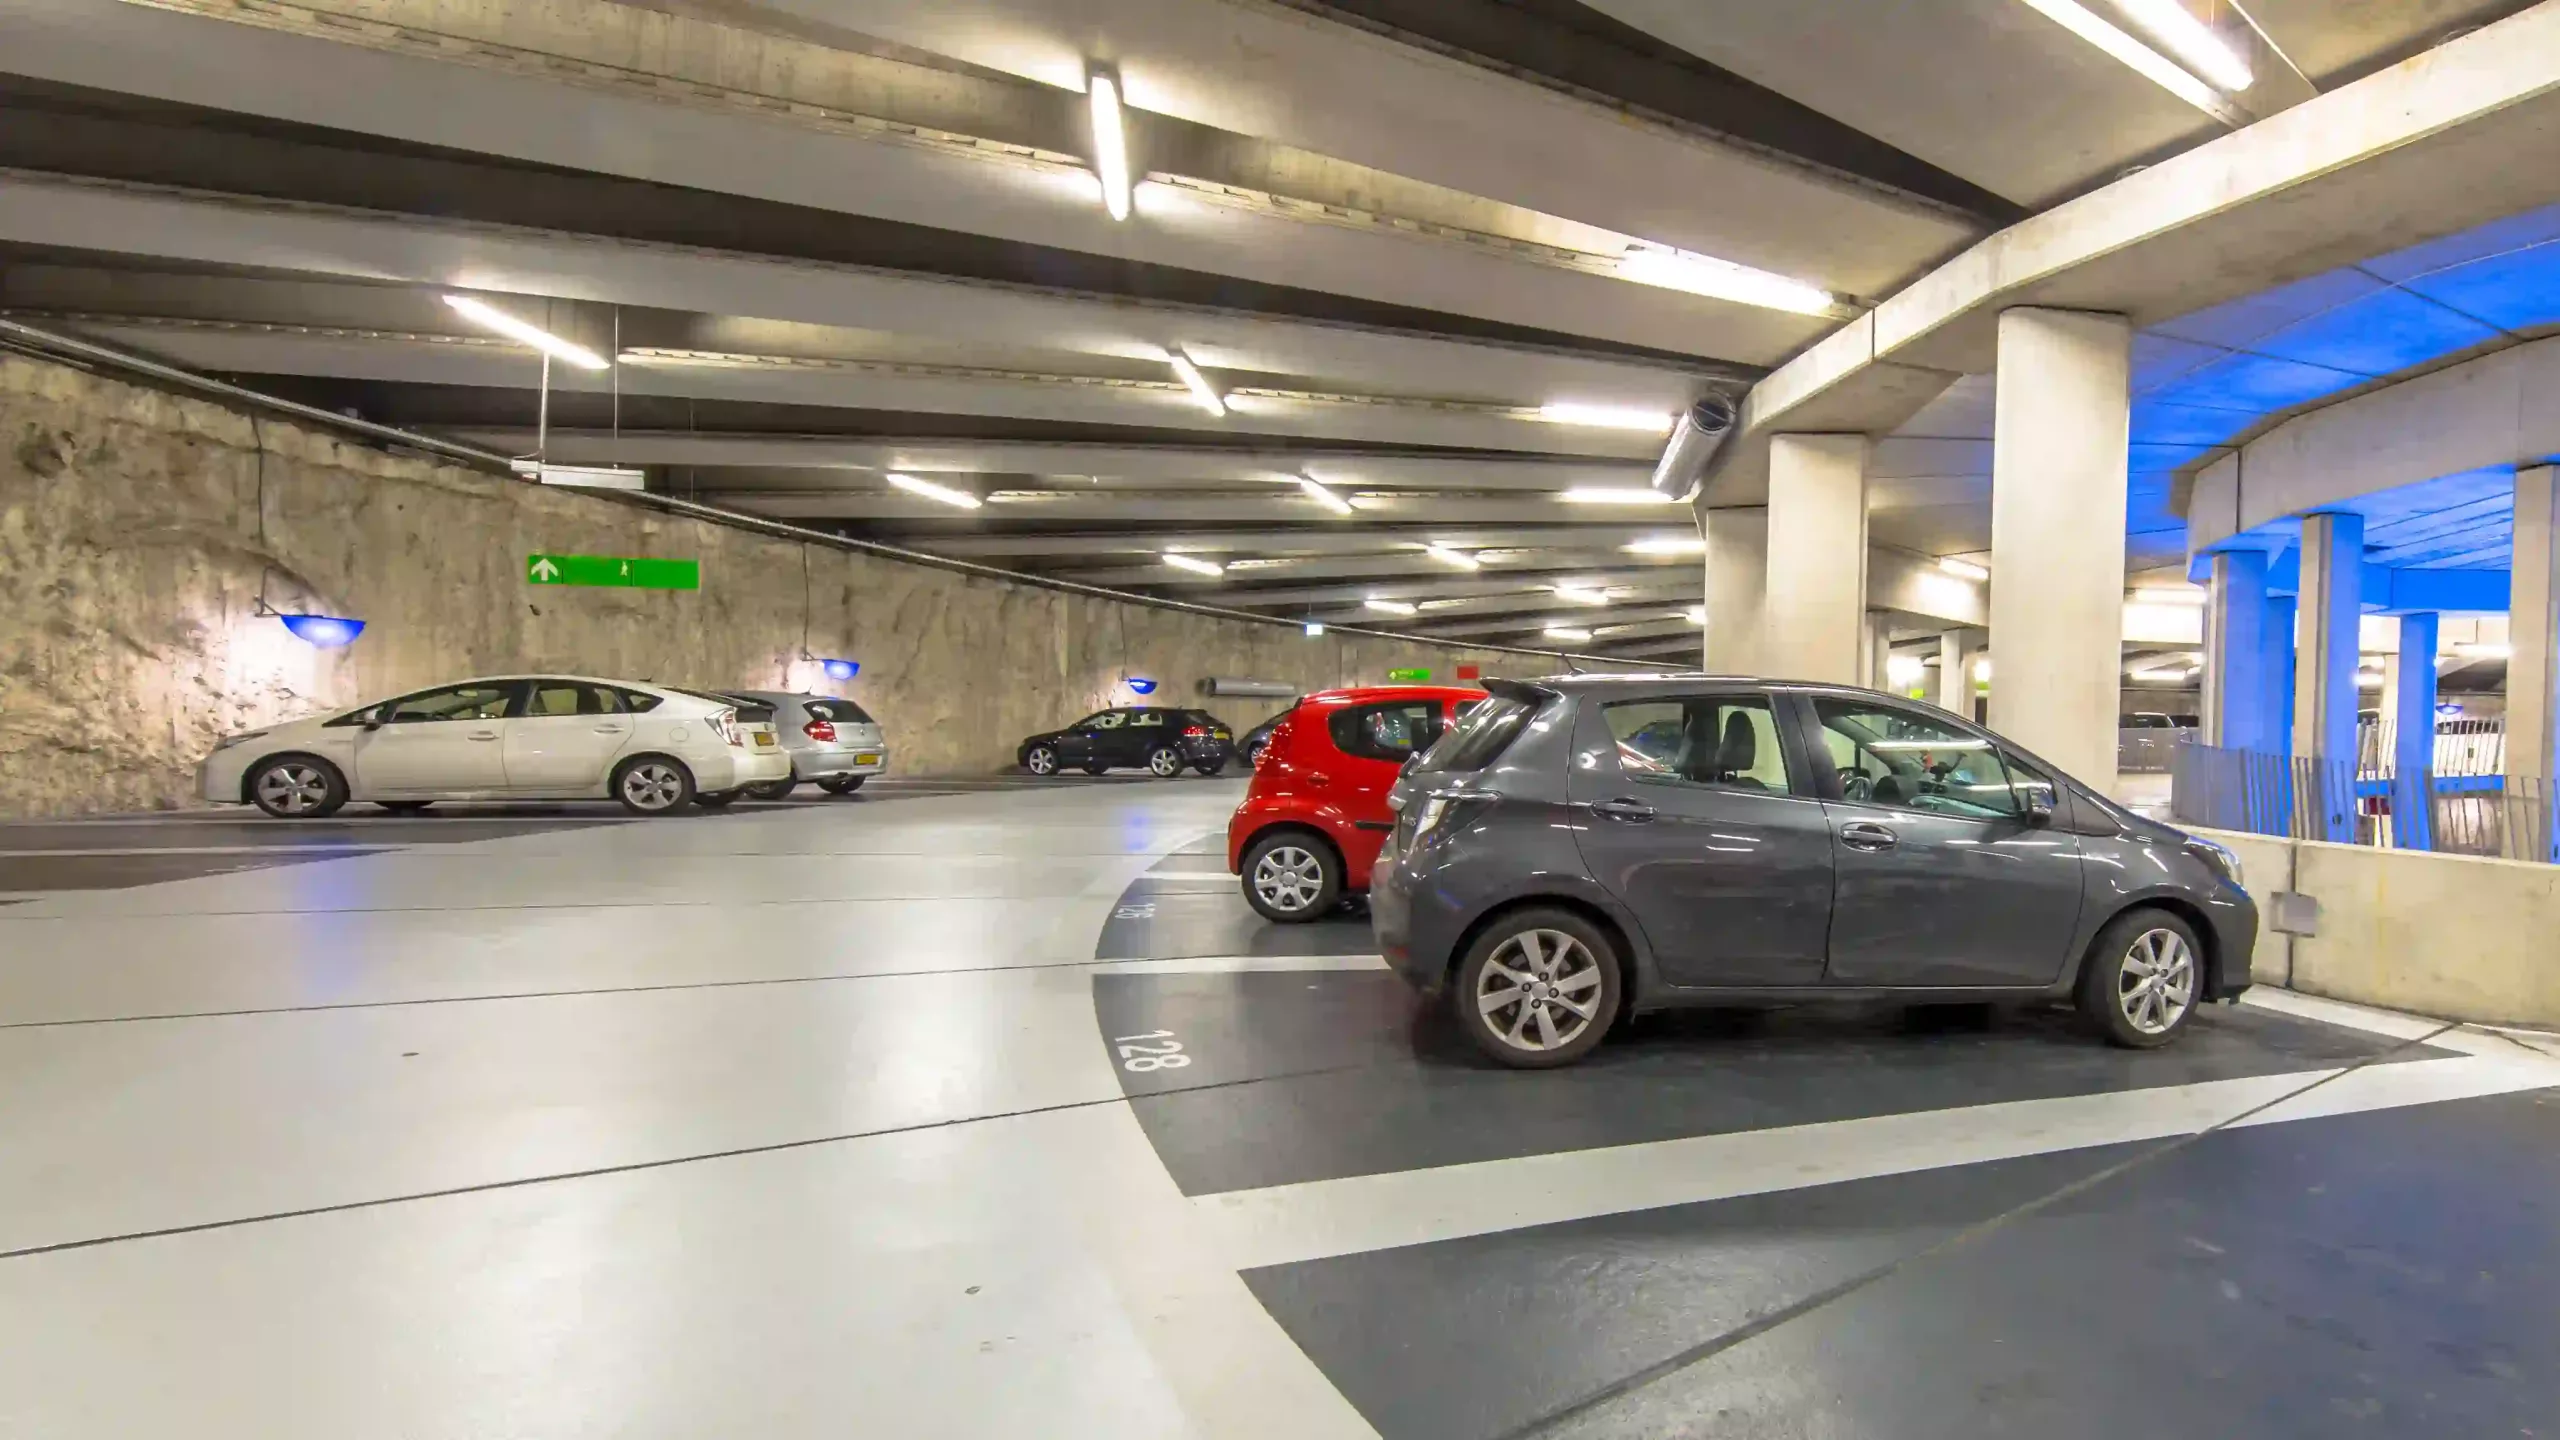 A Parking Lot Equipped With Intelligent Lighting Control System